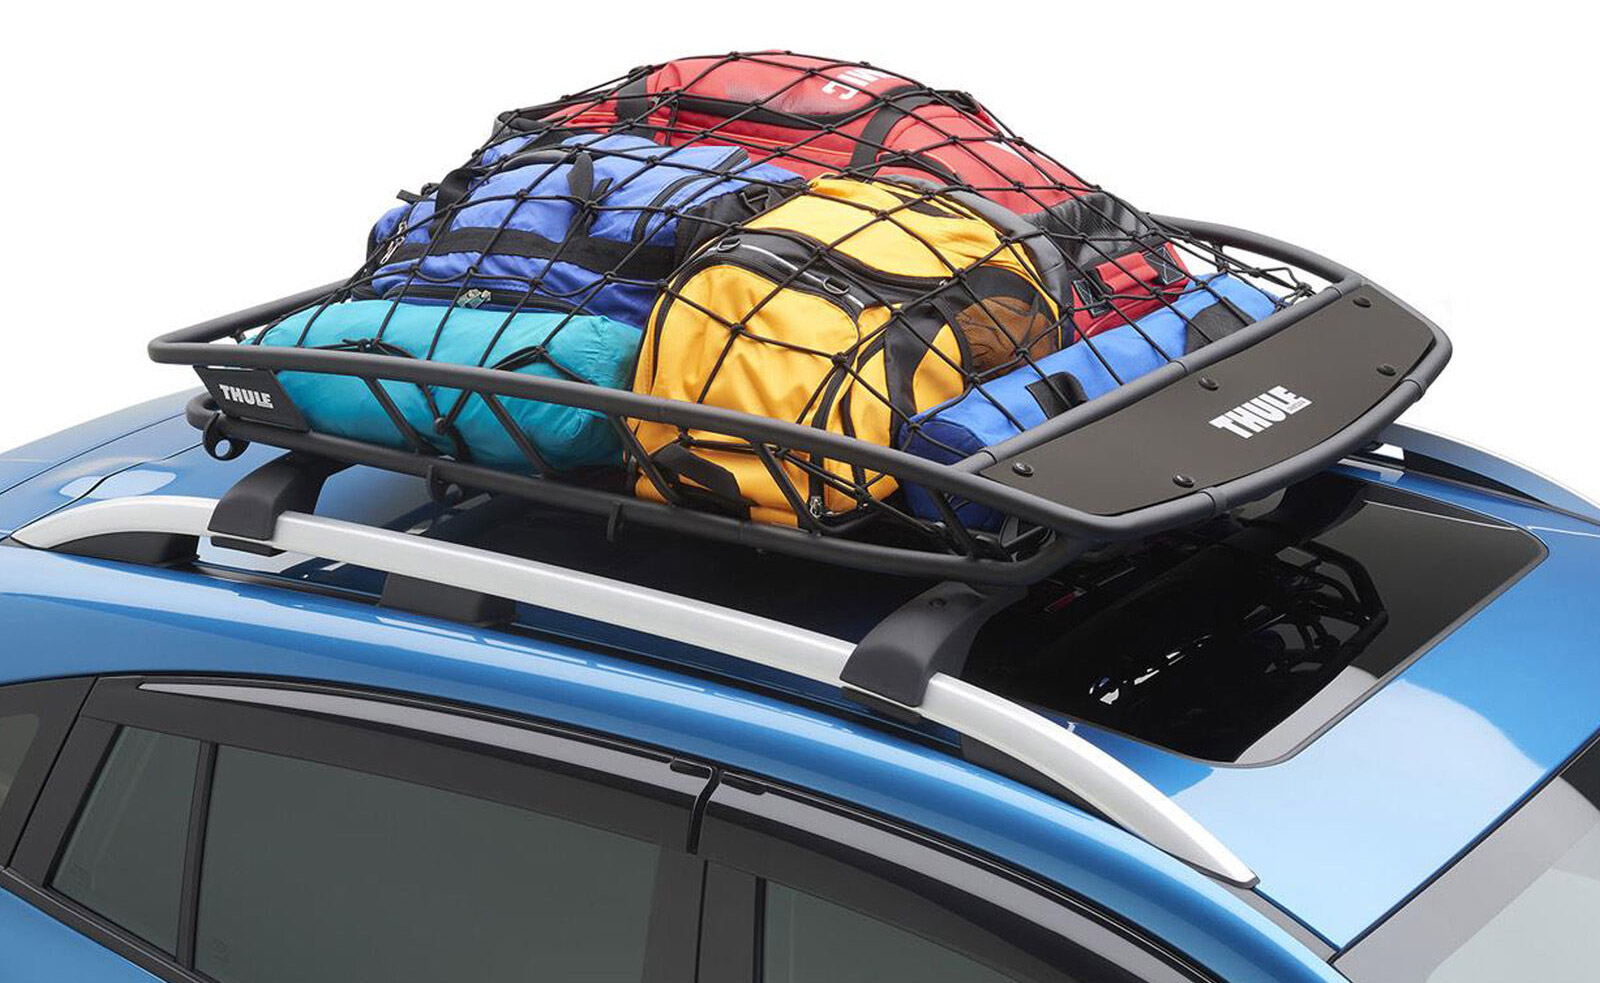 Vehicle racks for professionals